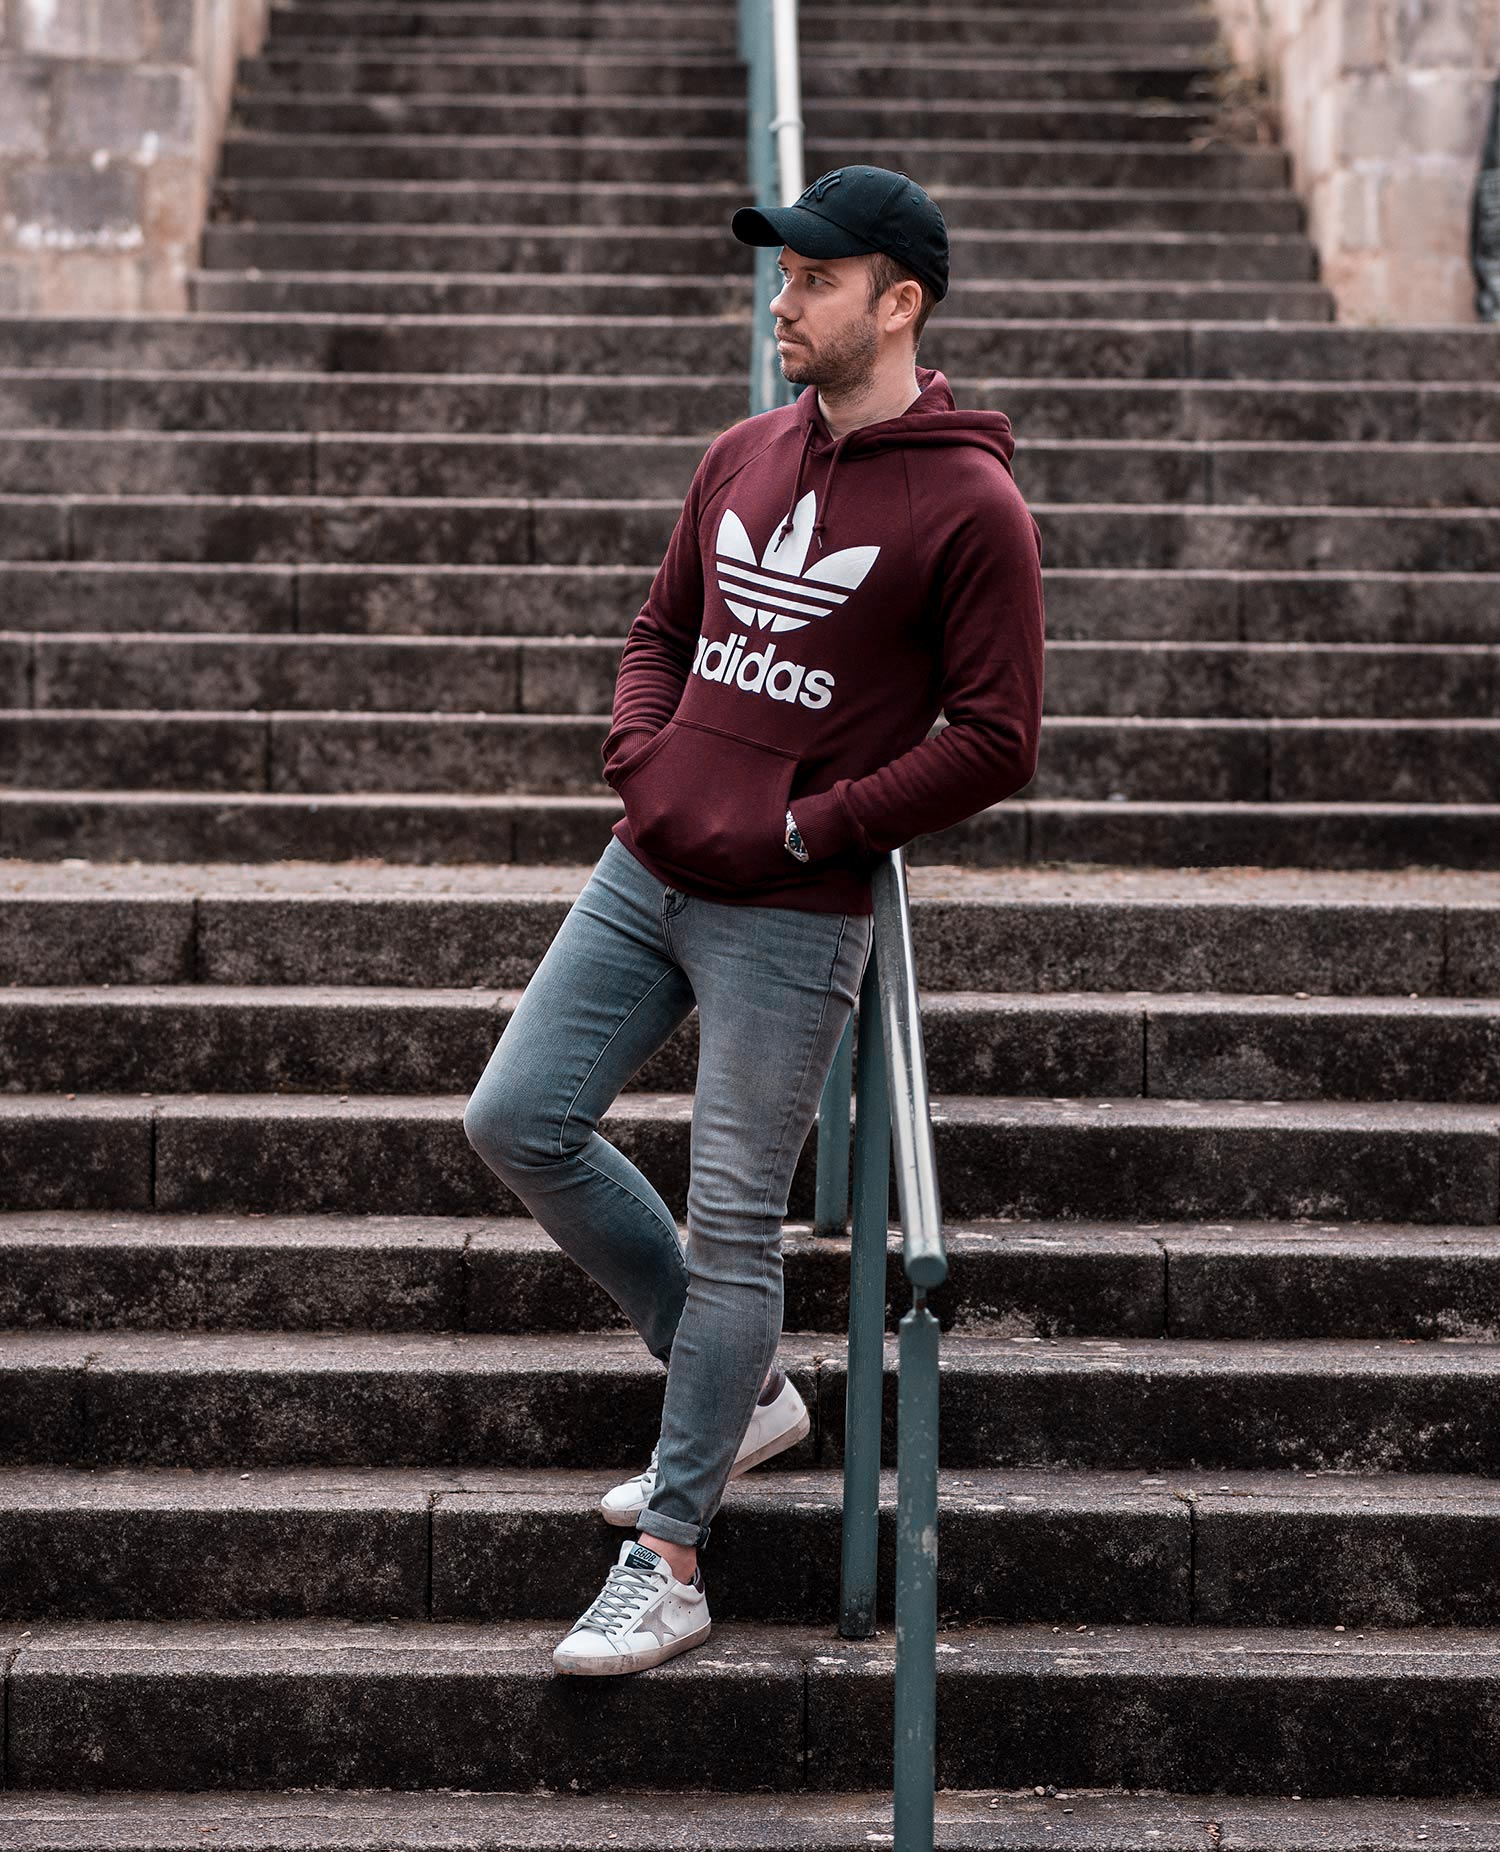 adidas and jeans outfit